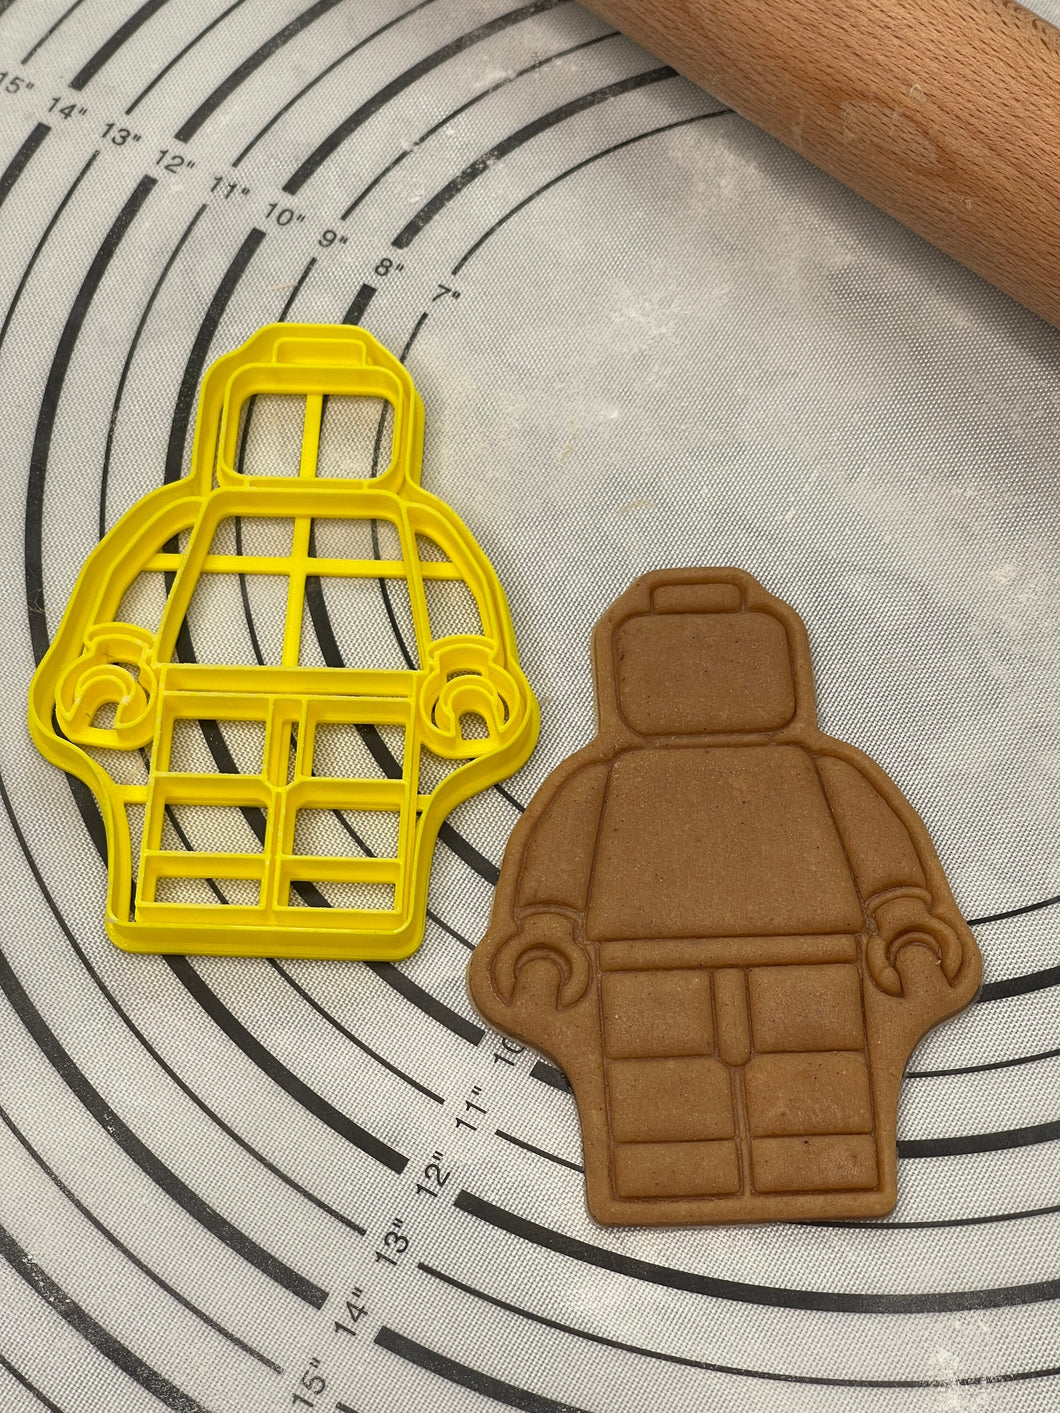 Lego Minifigures Cookie Cutter & Mold 4.75-Inch-Scale Produced by 3D Kitchen Art